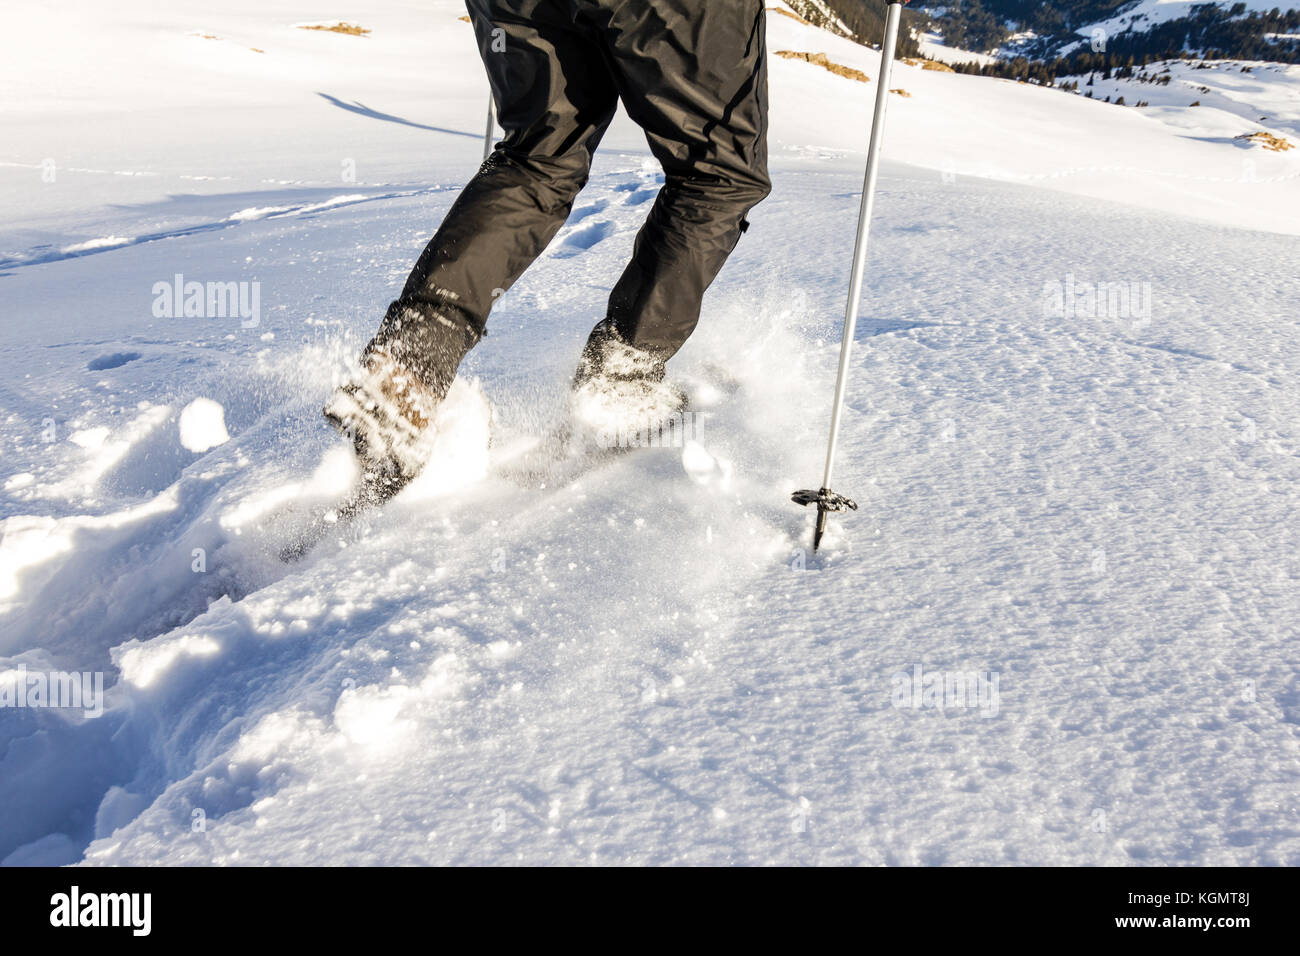 Man running downhill through deep snow with snoeshoes and hiking sticks. Stock Photo